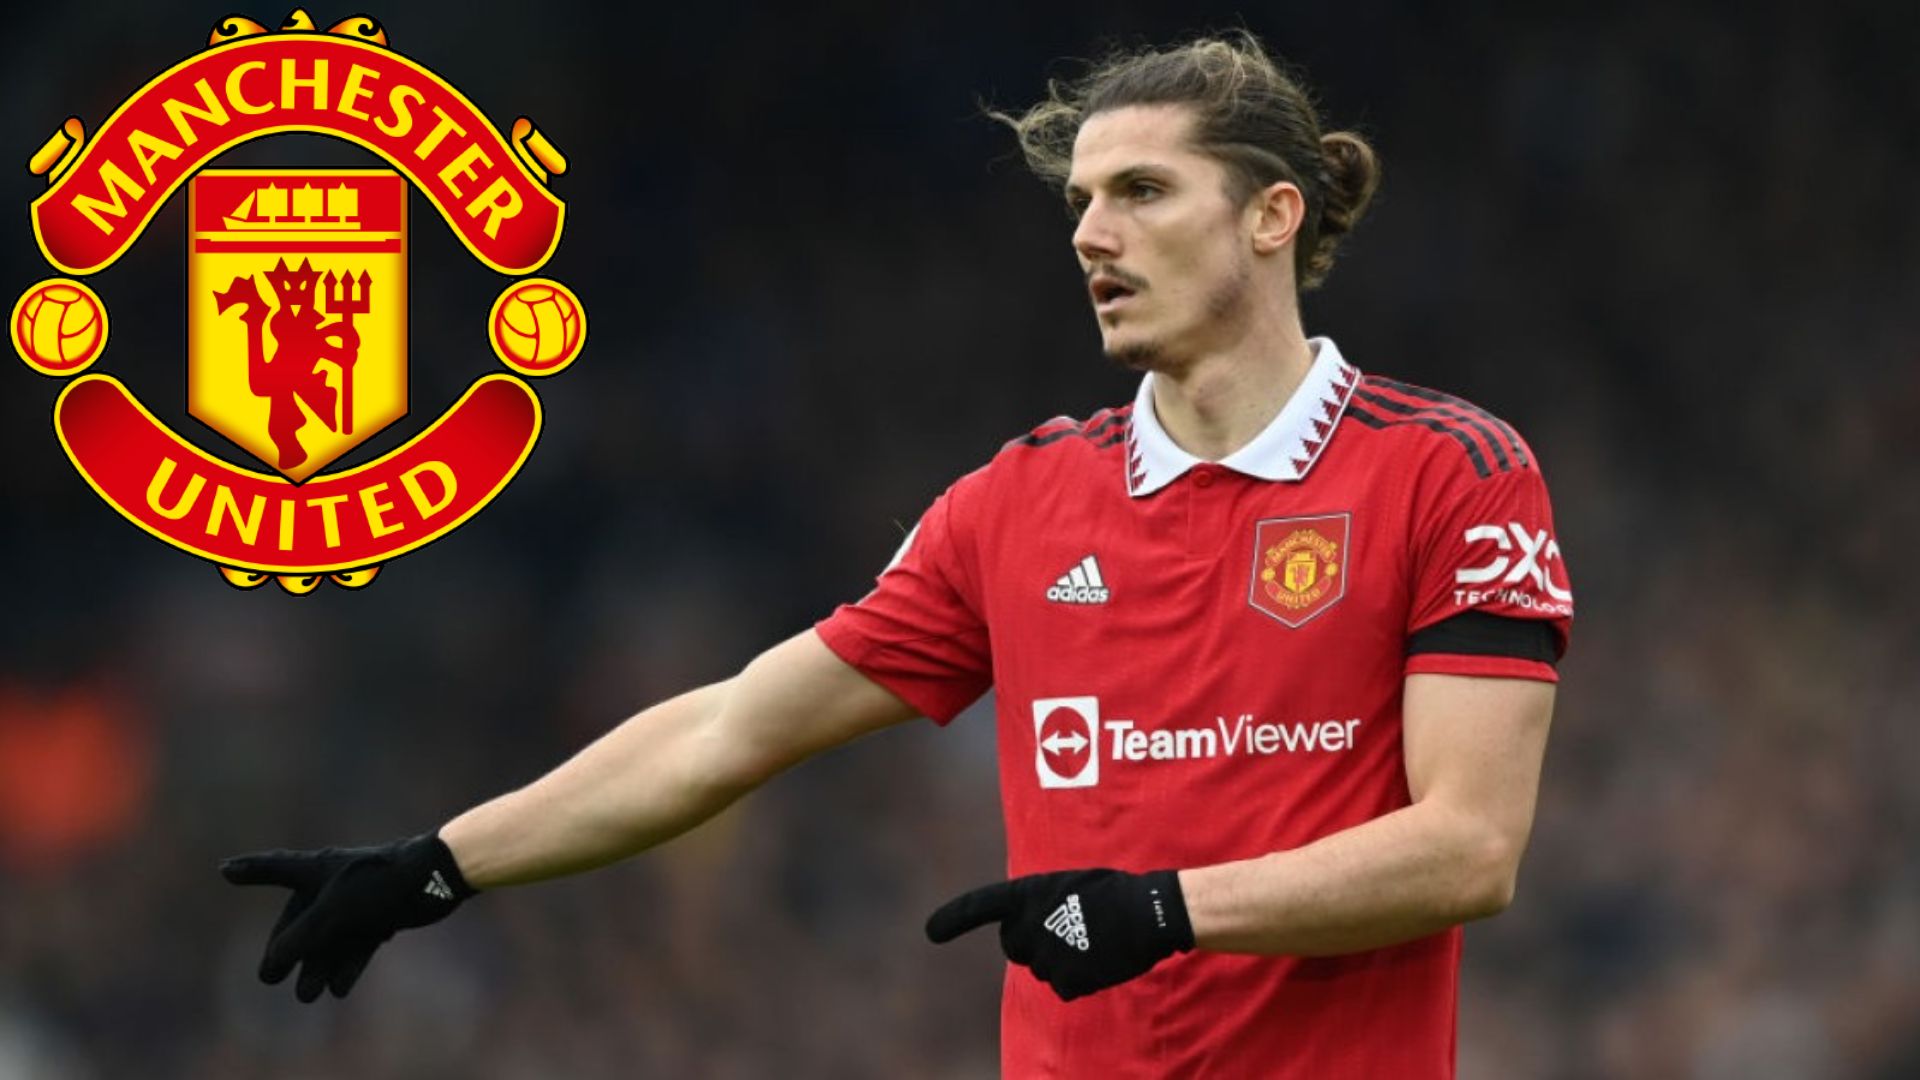 Marcel Sabitzer won't join Man United permanently unless the price drops.